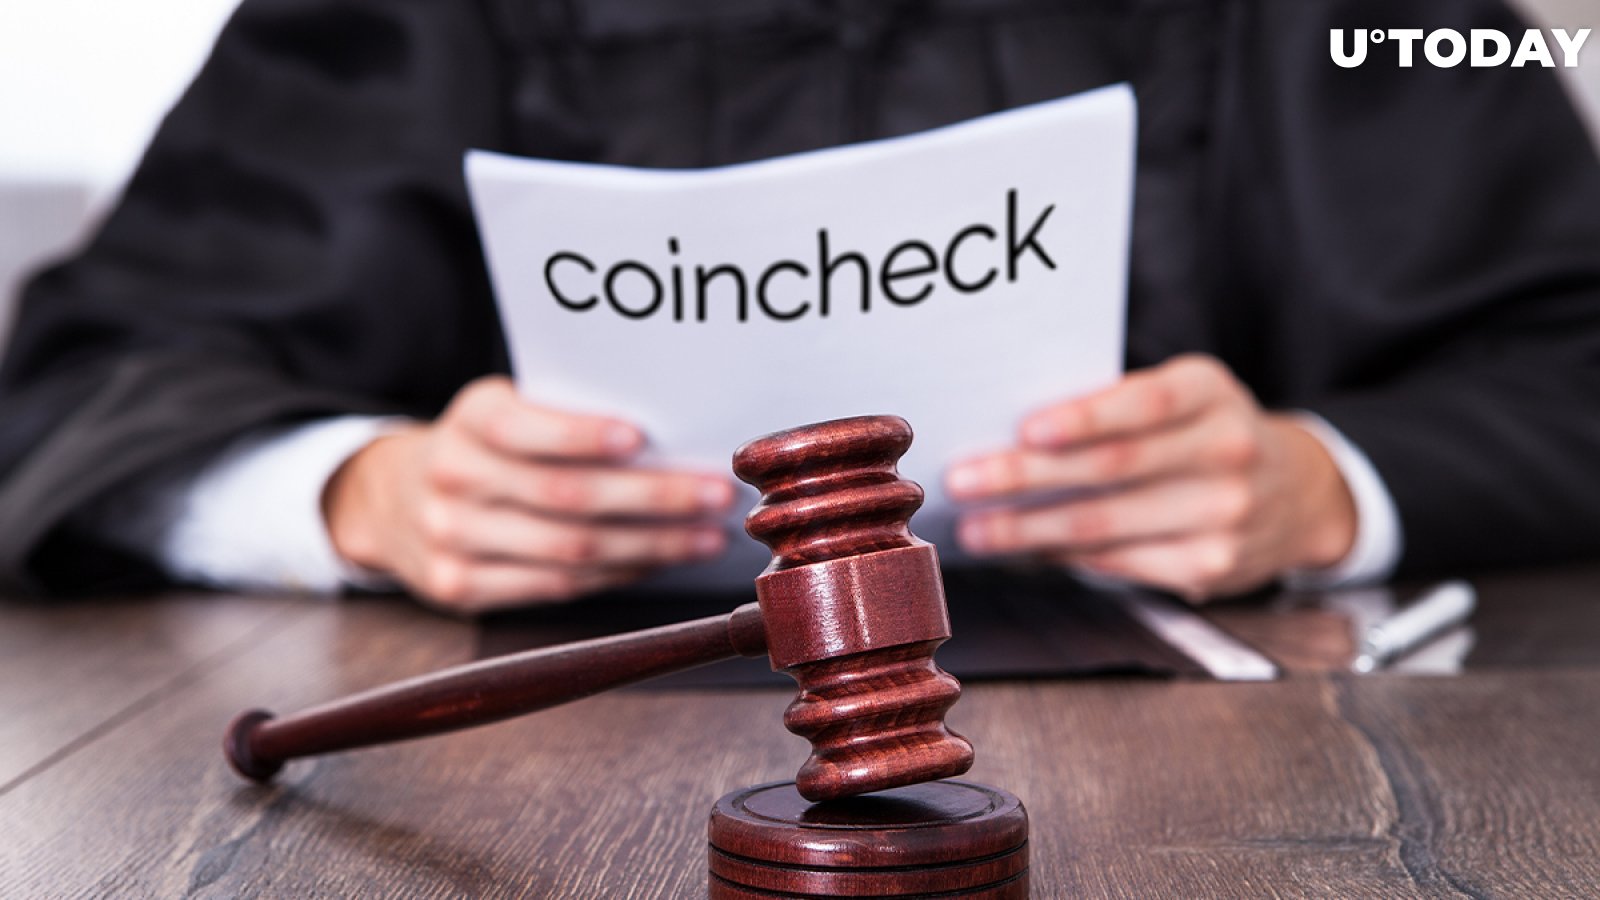 Crypto Grabbed by Hackers from Coincheck in 2018 to Be Confiscated by Court Order